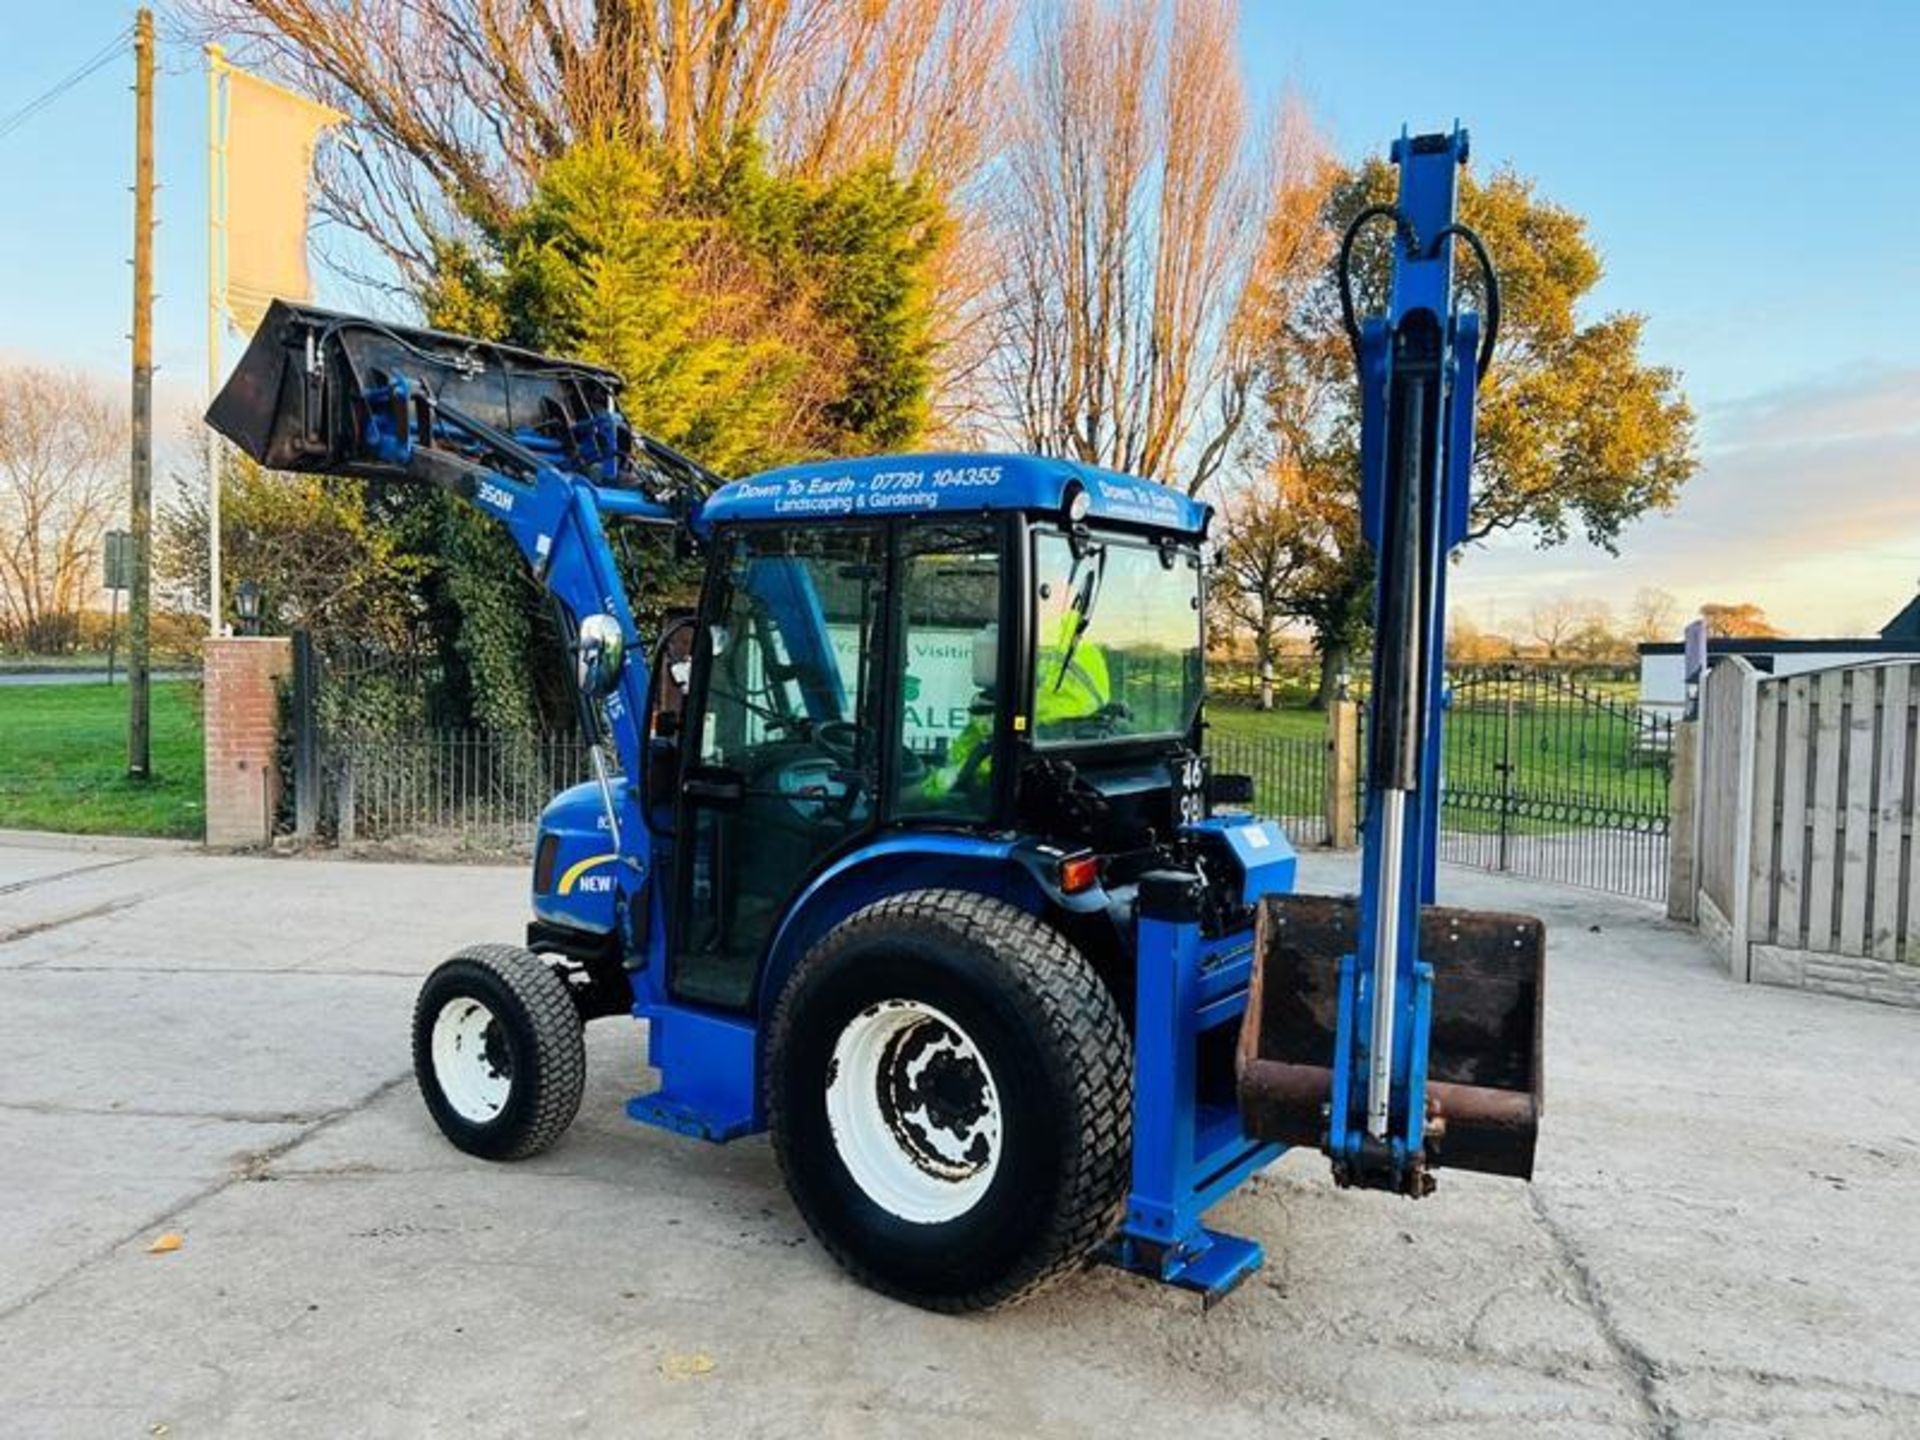 NEW HOLLAND BOOMER 40 4WD TRACTOR *YEAR 2014, ONLY 737 HRS* C/W LOADER & BACK TACTOR  - Image 3 of 19